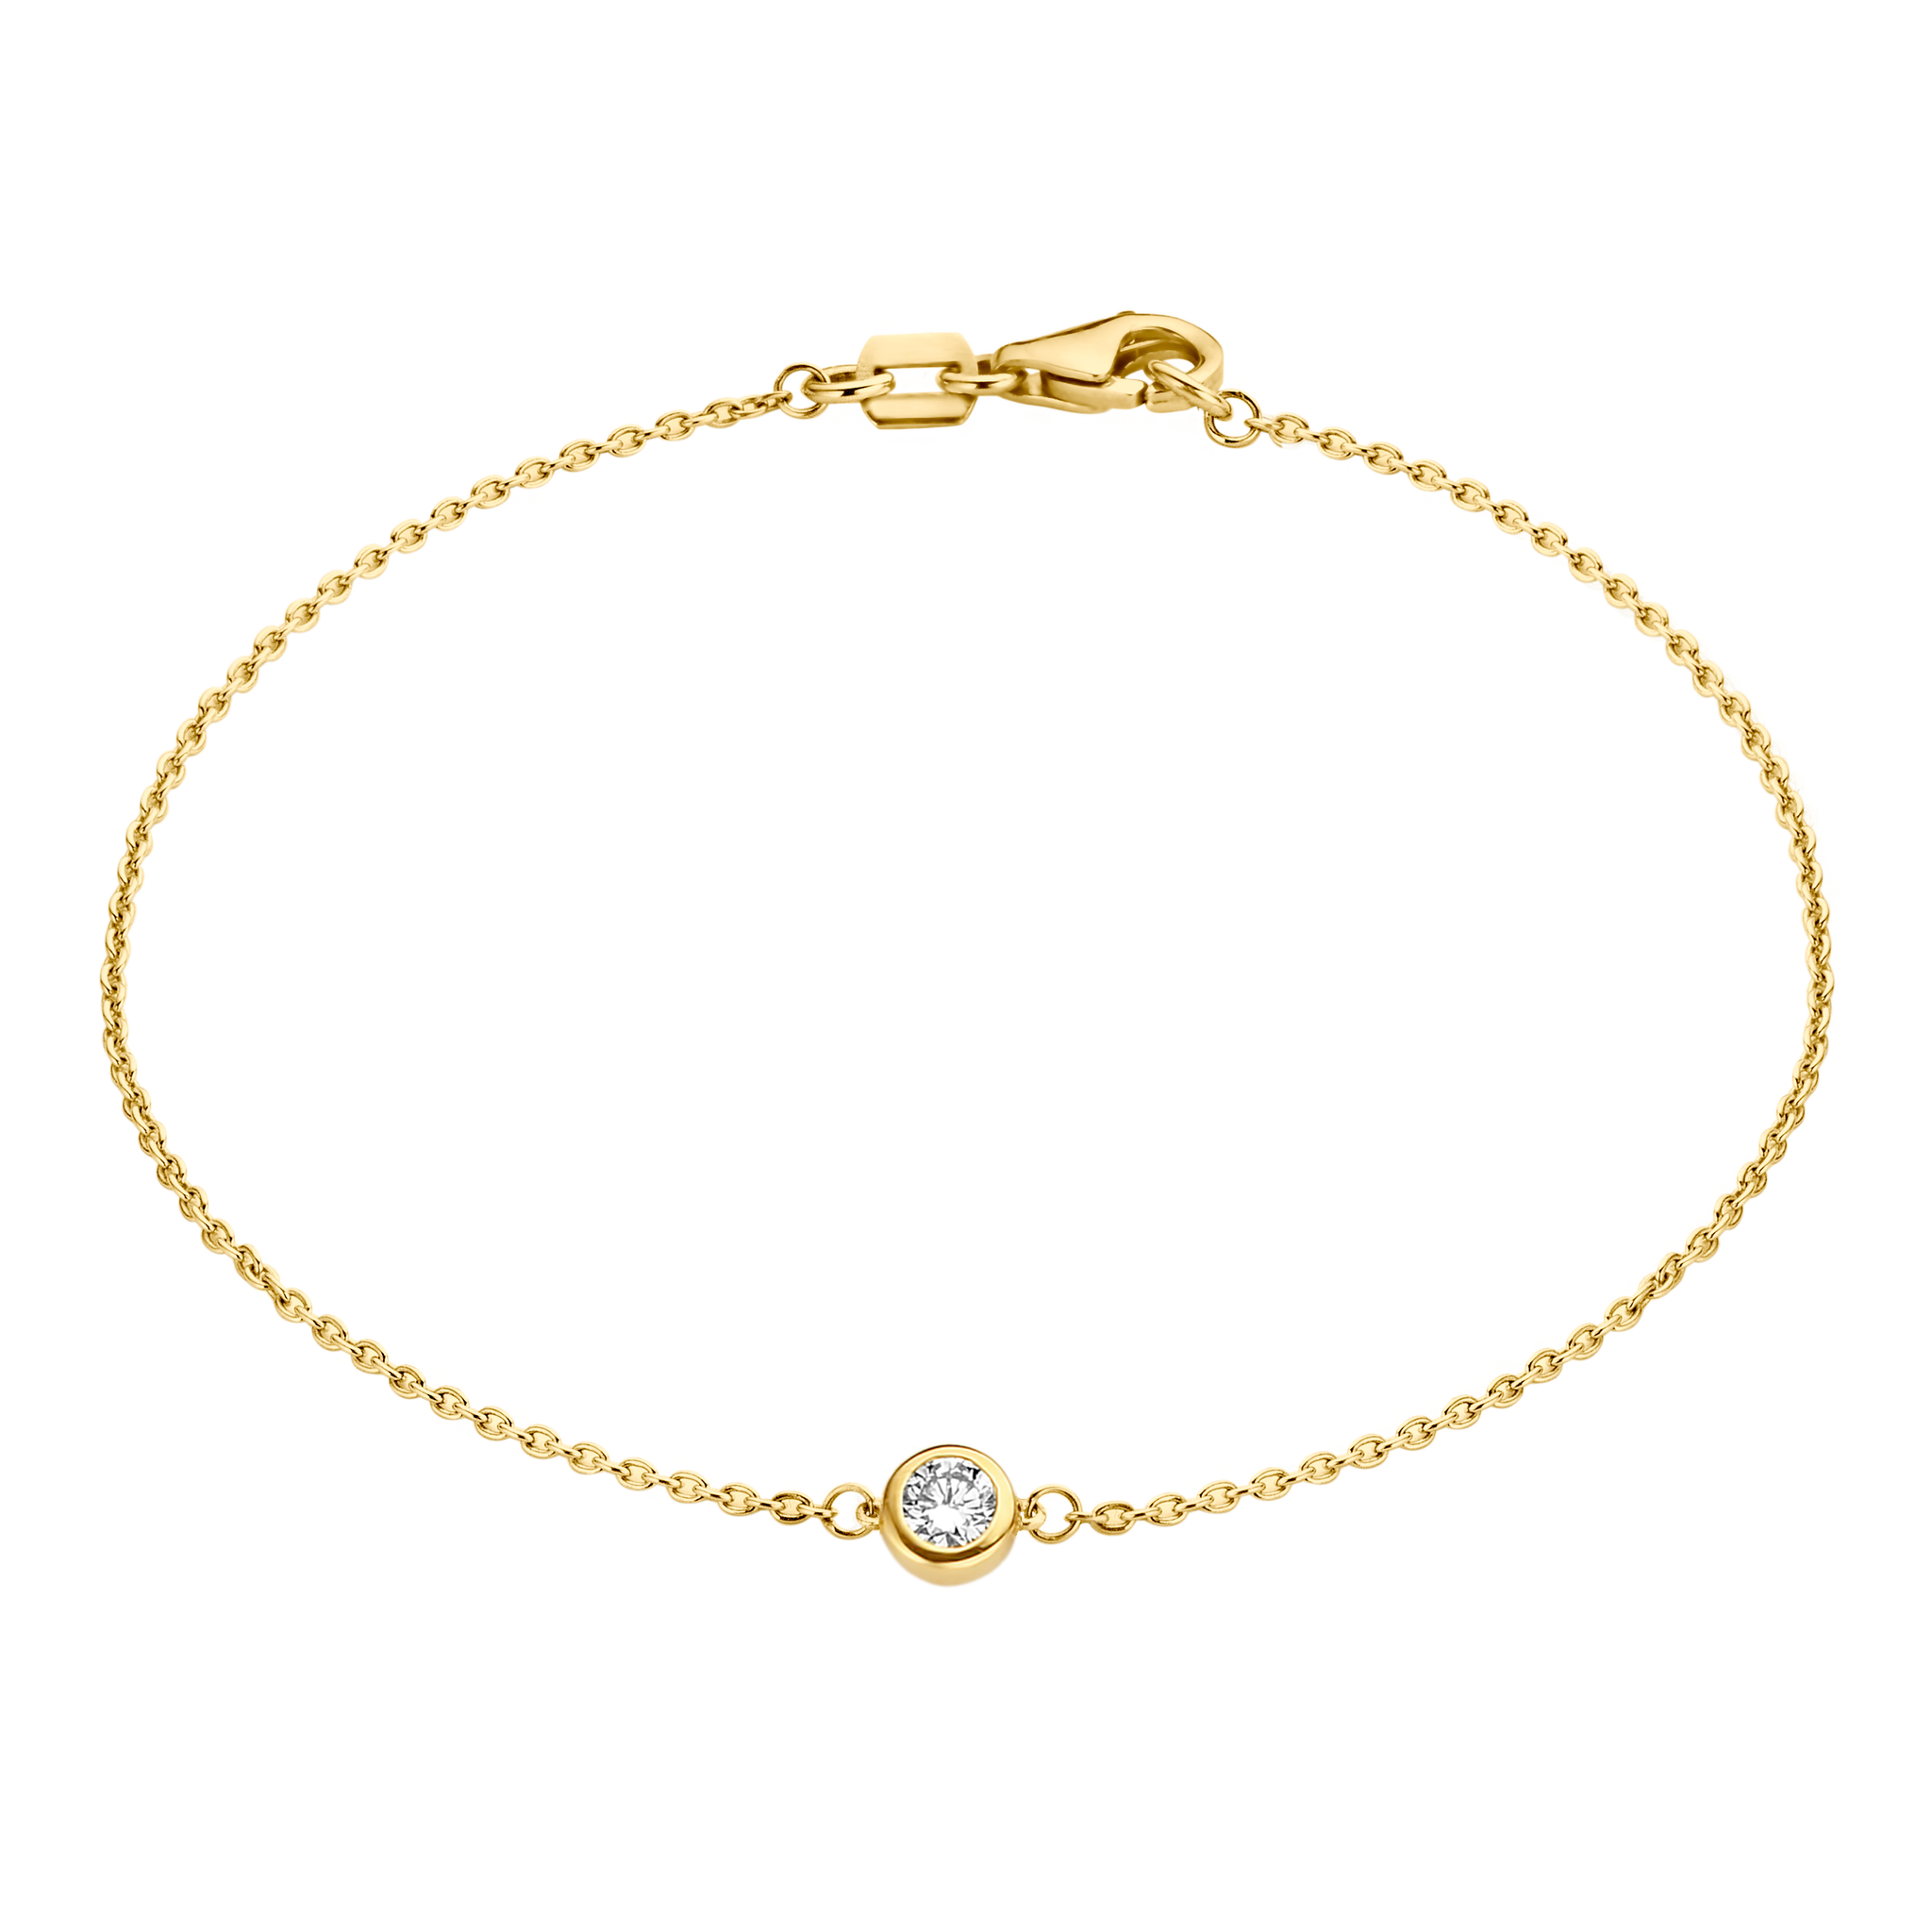 A solitaire 0.1 carat round brilliant is bezel set in 18k recycled gold. This bracelet can be adjusted to two different lengths, 6.3" (16 cm) and 6.7" (17 cm). Reach out to our team for further customization options. 